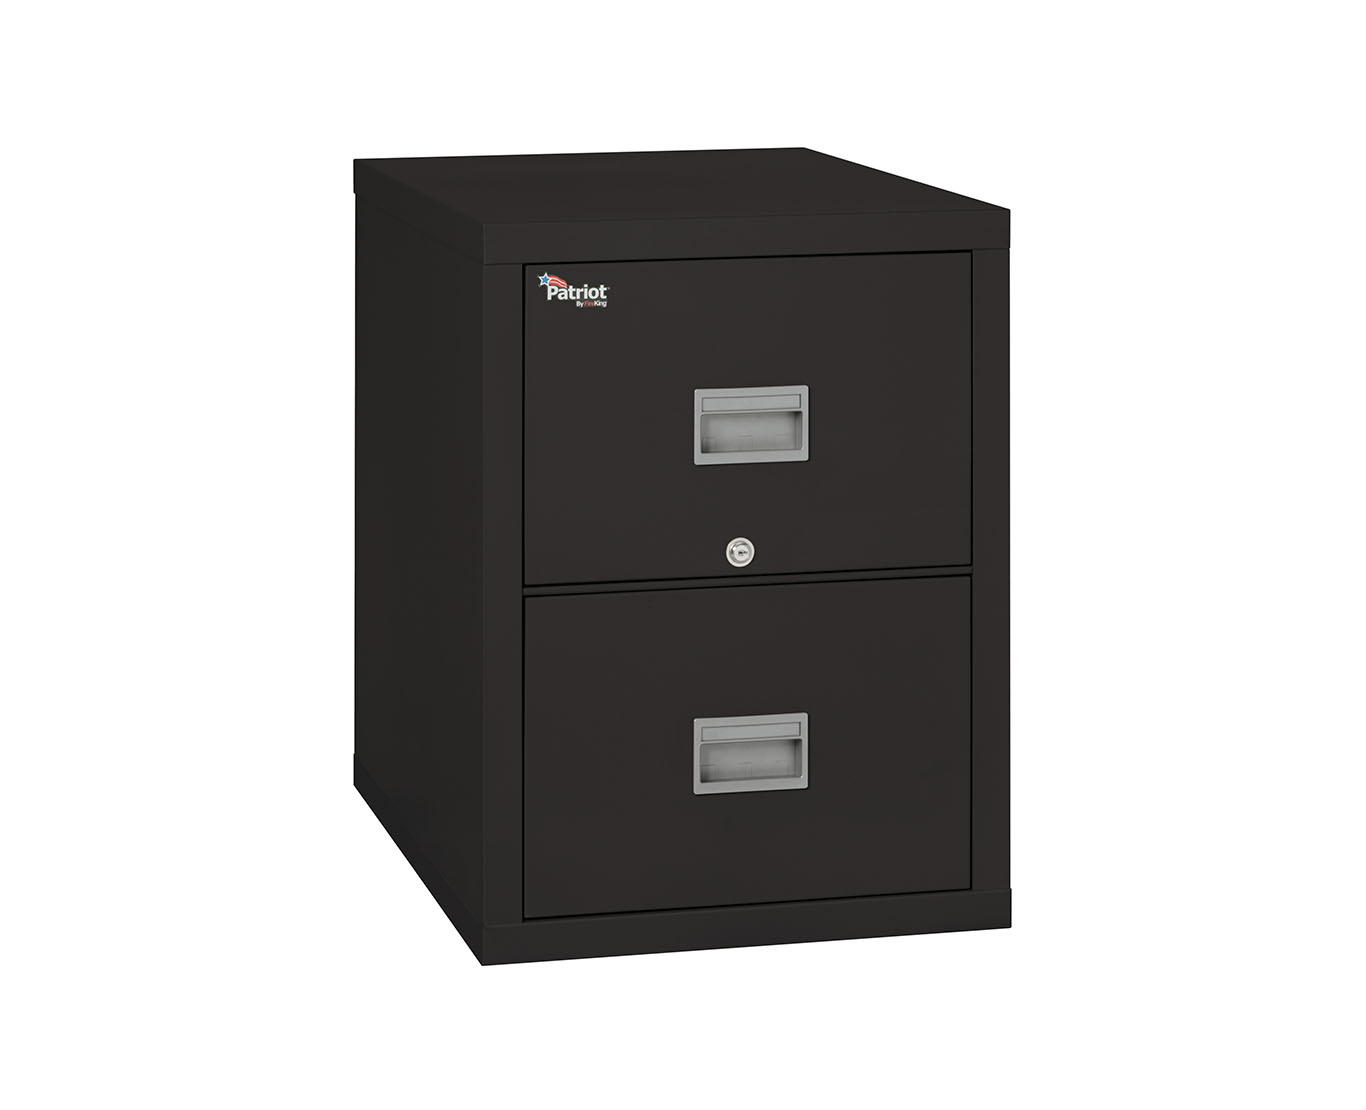 Patriot Vertical File Cabinets Fireking Security Group inside size 1366 X 1110